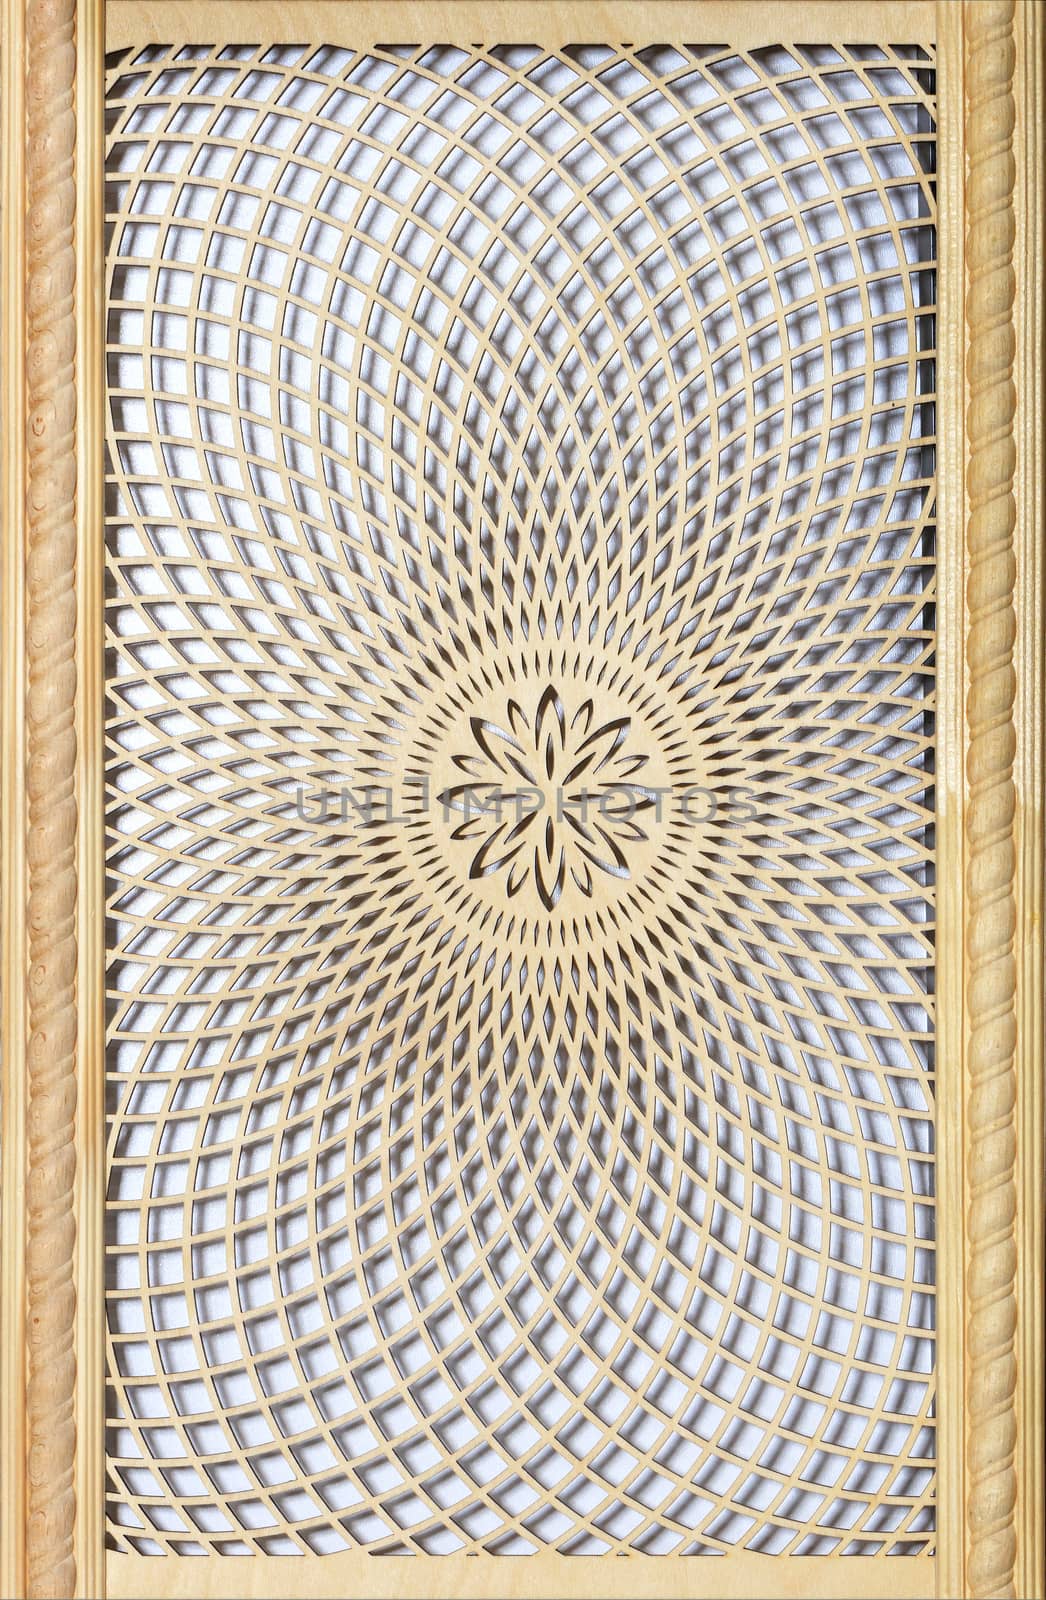 Wooden threaded figured panel with a pattern in the form of concentric circles around the center of the oriental style. Wood wall art, for wall decoration.